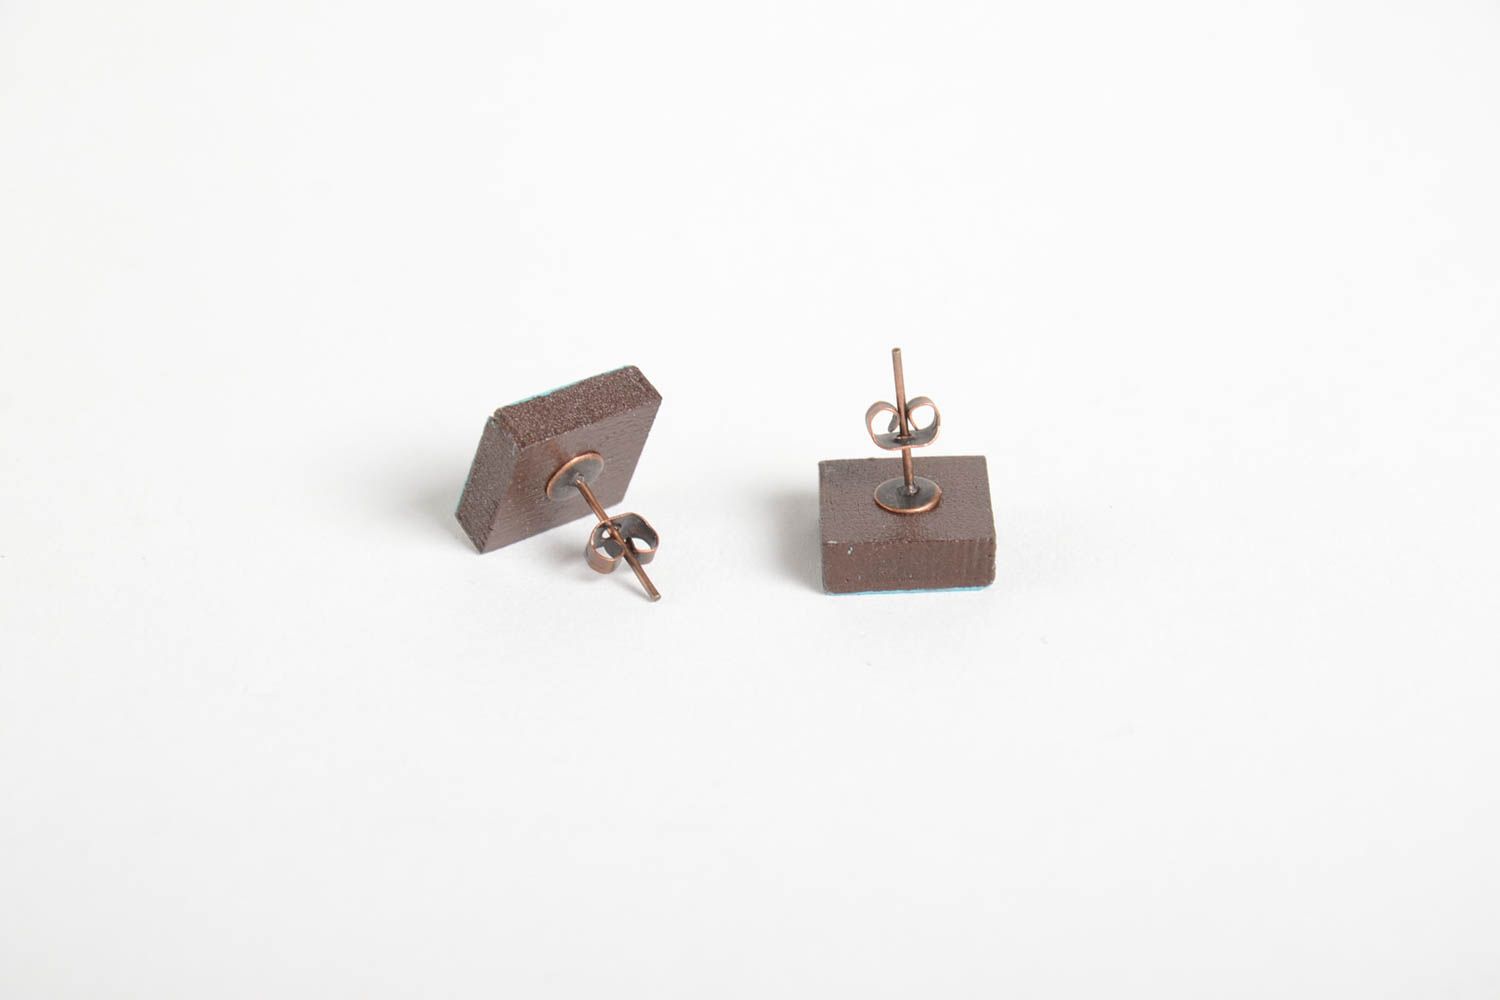 Handmade wooden stud earrings artisan jewelry fashion accessories for girls photo 3